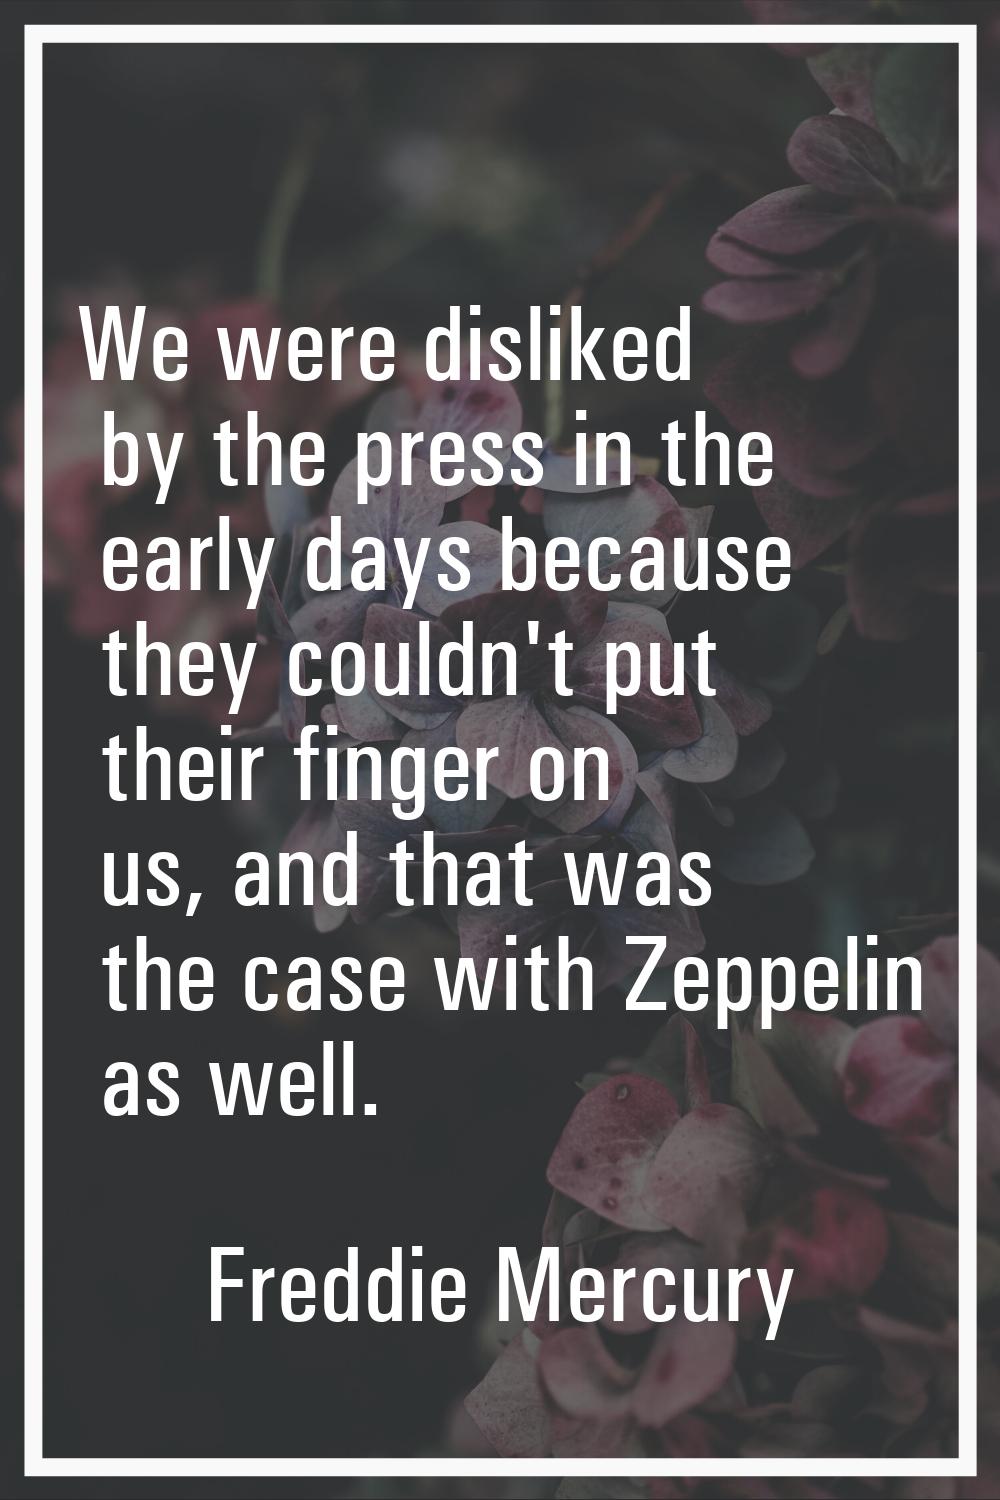 We were disliked by the press in the early days because they couldn't put their finger on us, and t